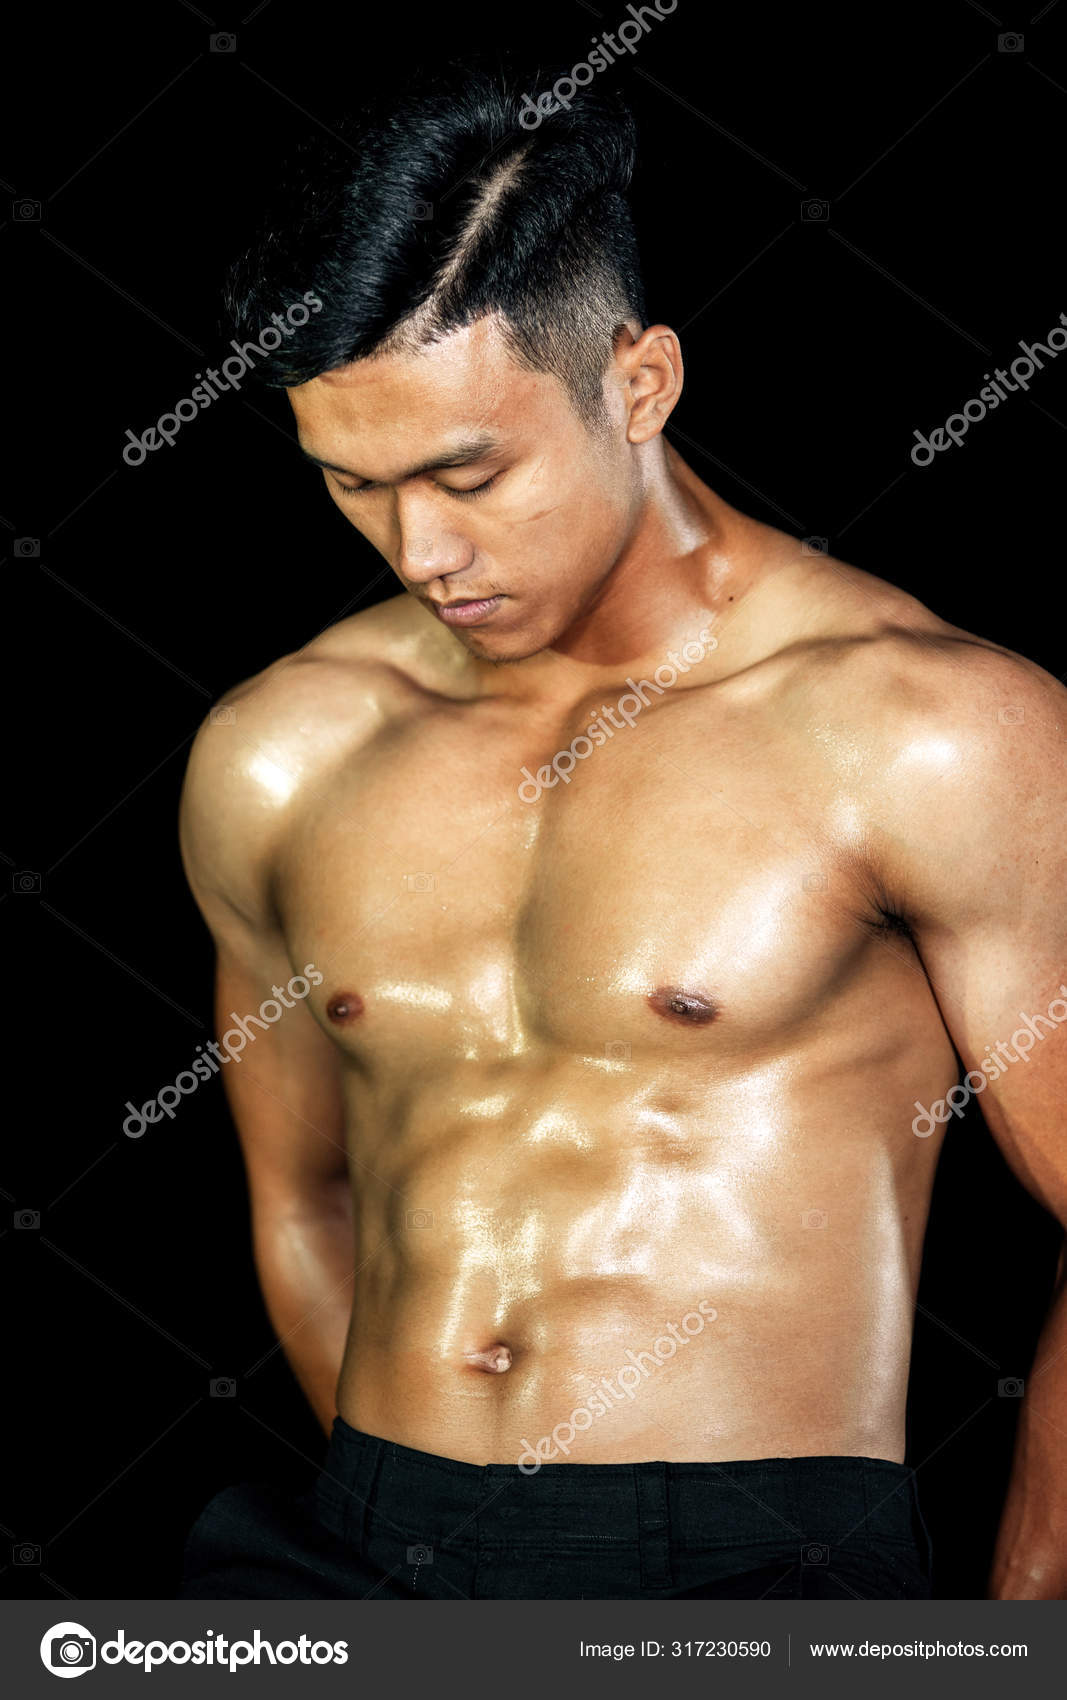 Asian bodybuilder handsome men posing muscle front on the black background.  Fitness body gym big chest and shoulder and bicep. Healthy ideal body type.  Stock Photo by ©khoamartin 317230590